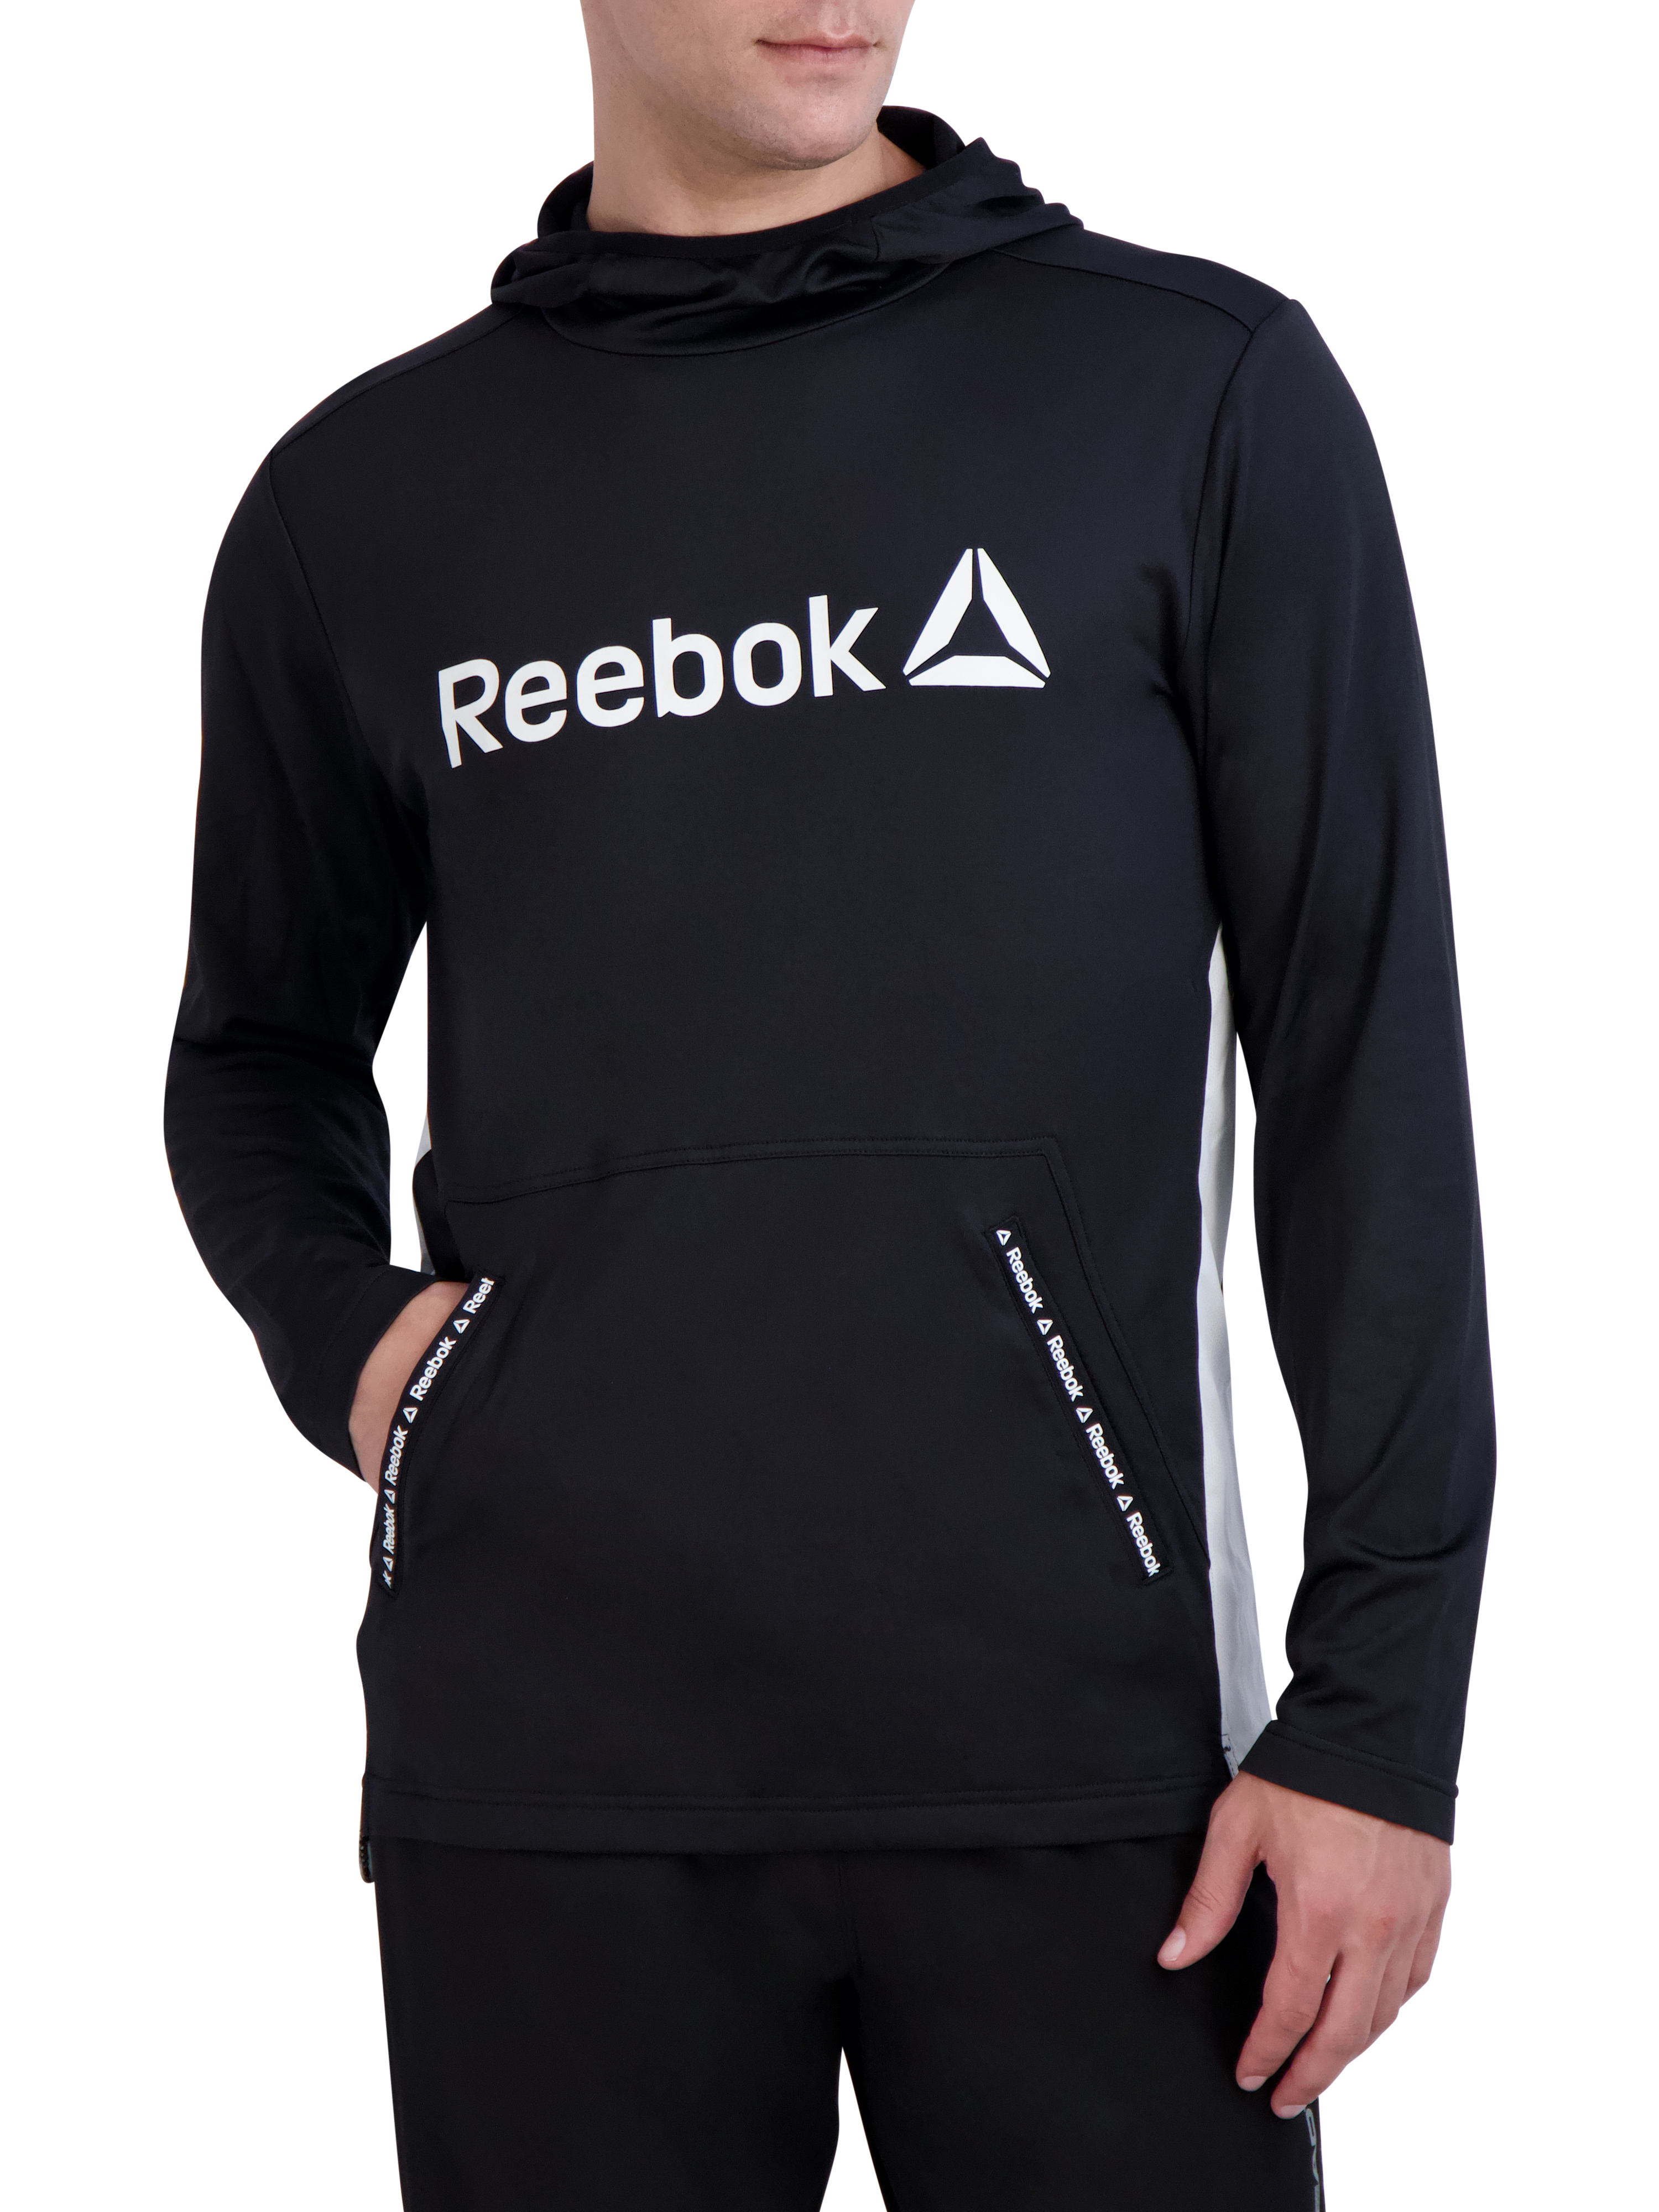 Reebok Men's Pullover Hoodie, up to Size 3XL - image 3 of 6